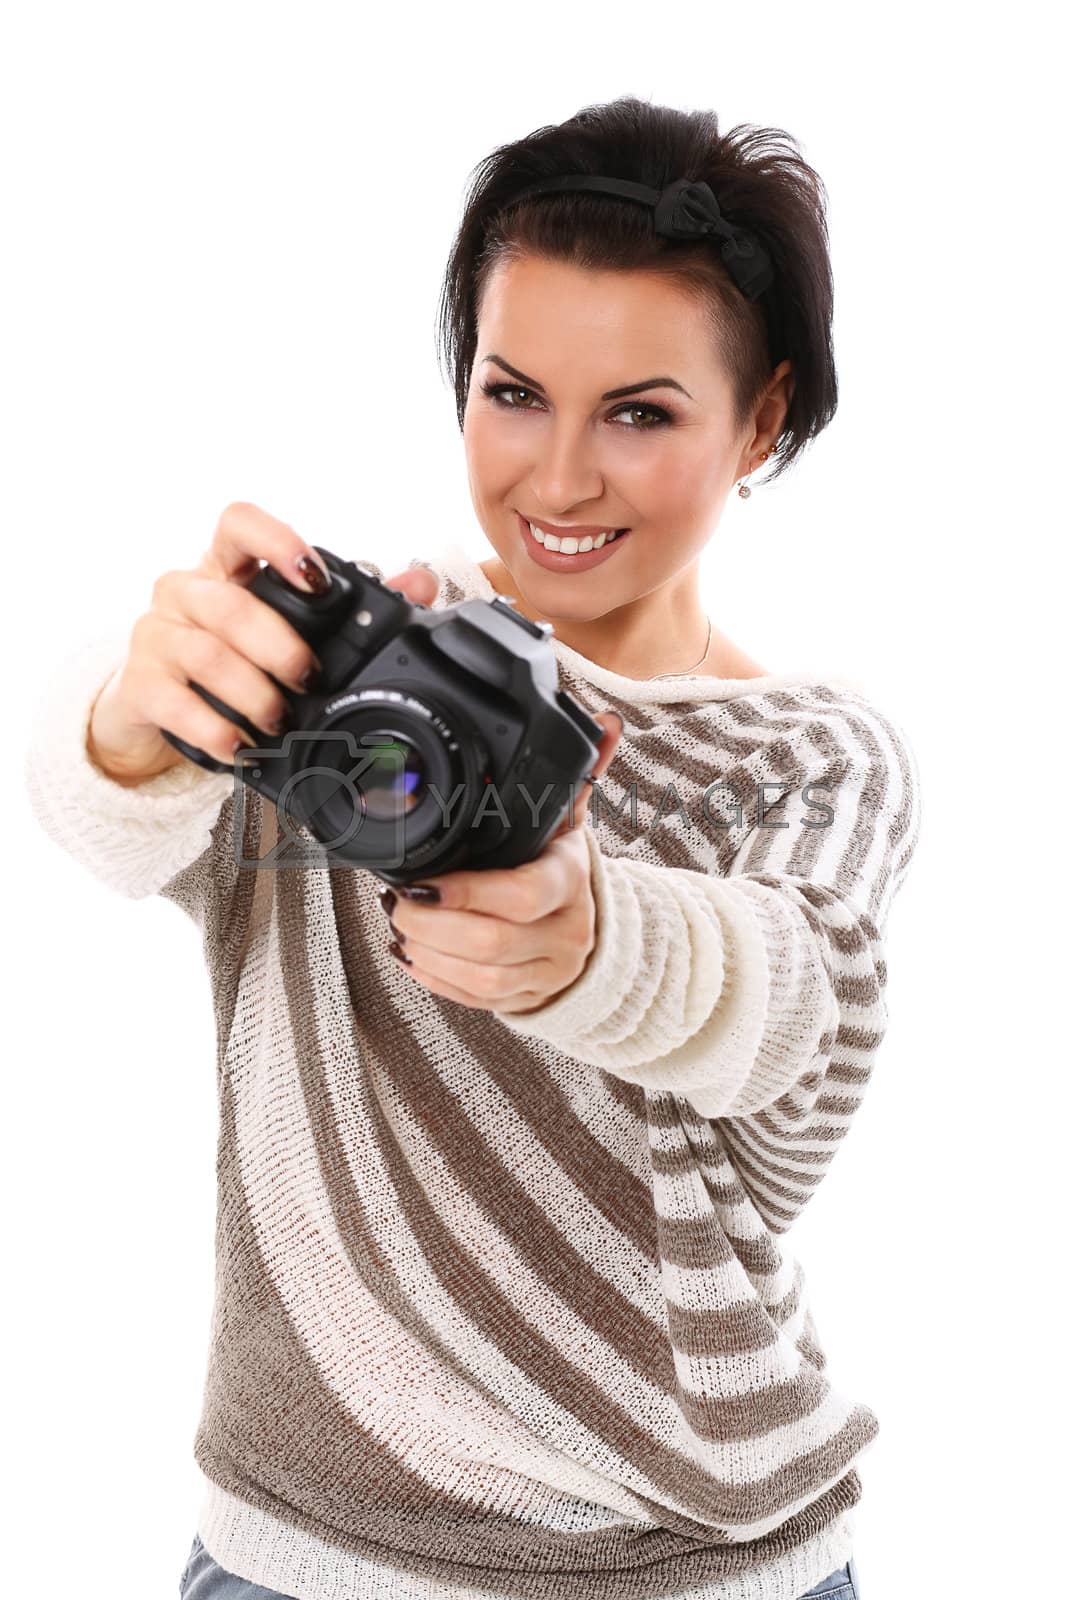 Royalty free image of Young happy woman with camera by rufatjumali